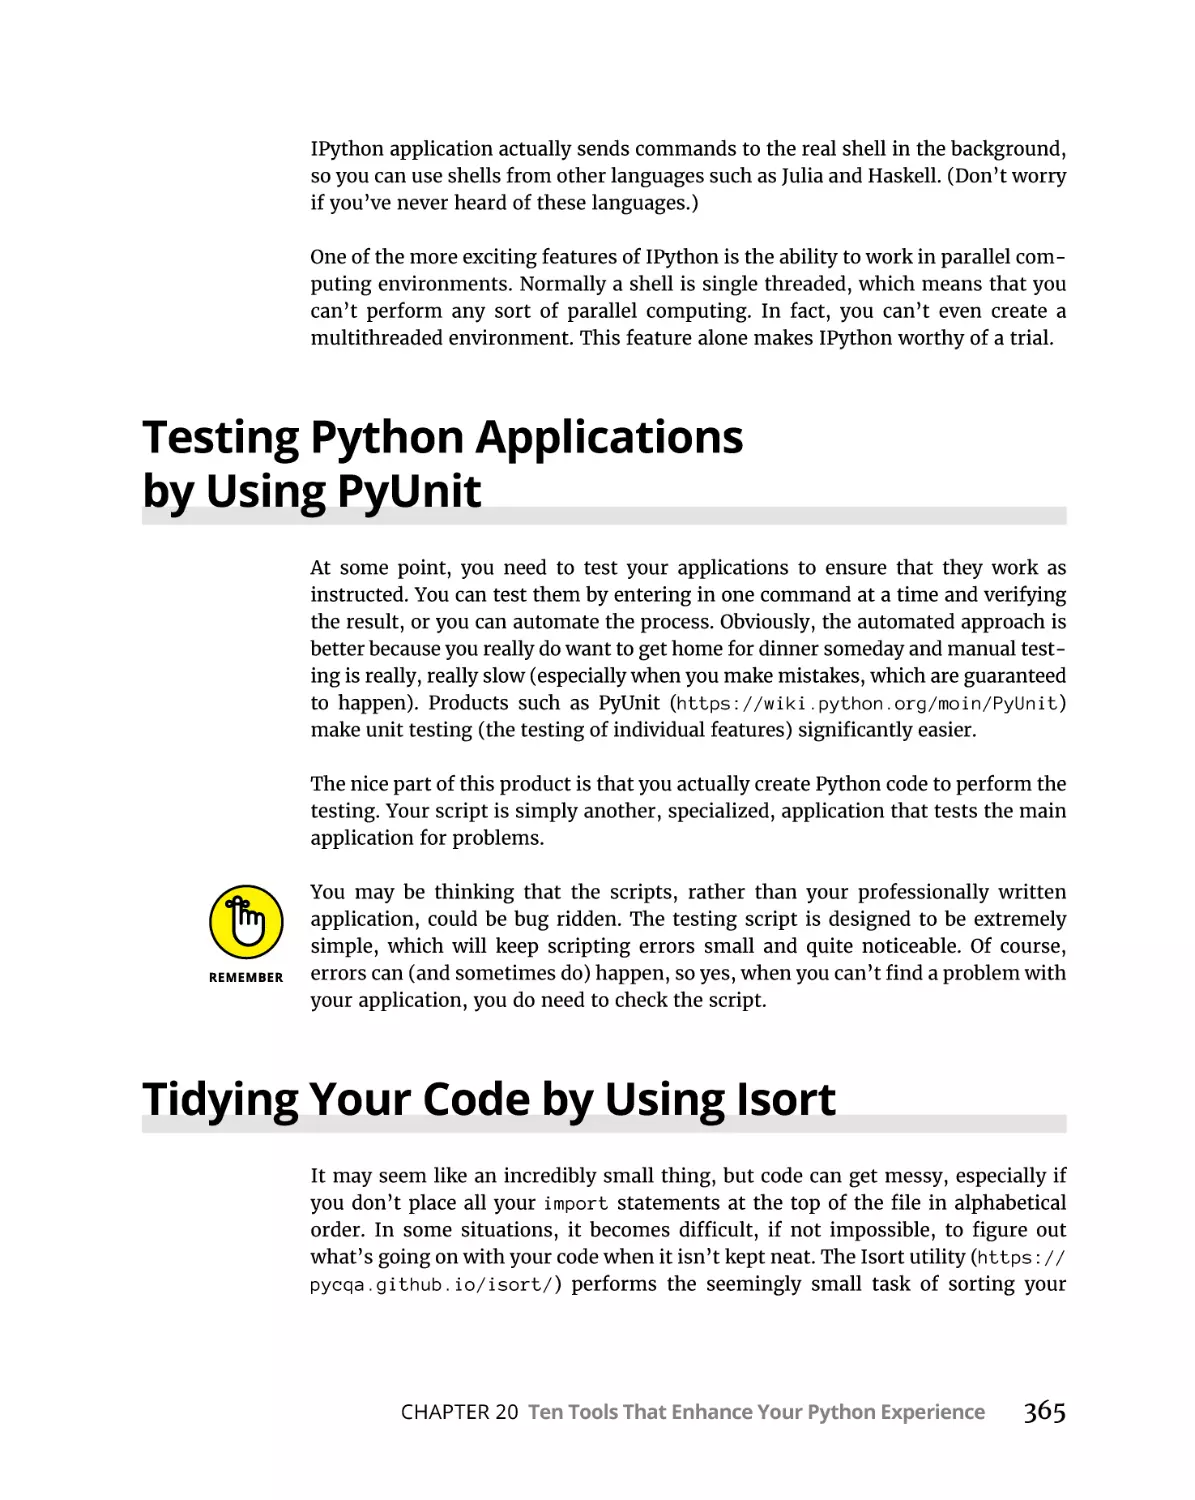 Testing Python Applications by Using PyUnit
Tidying Your Code by Using Isort